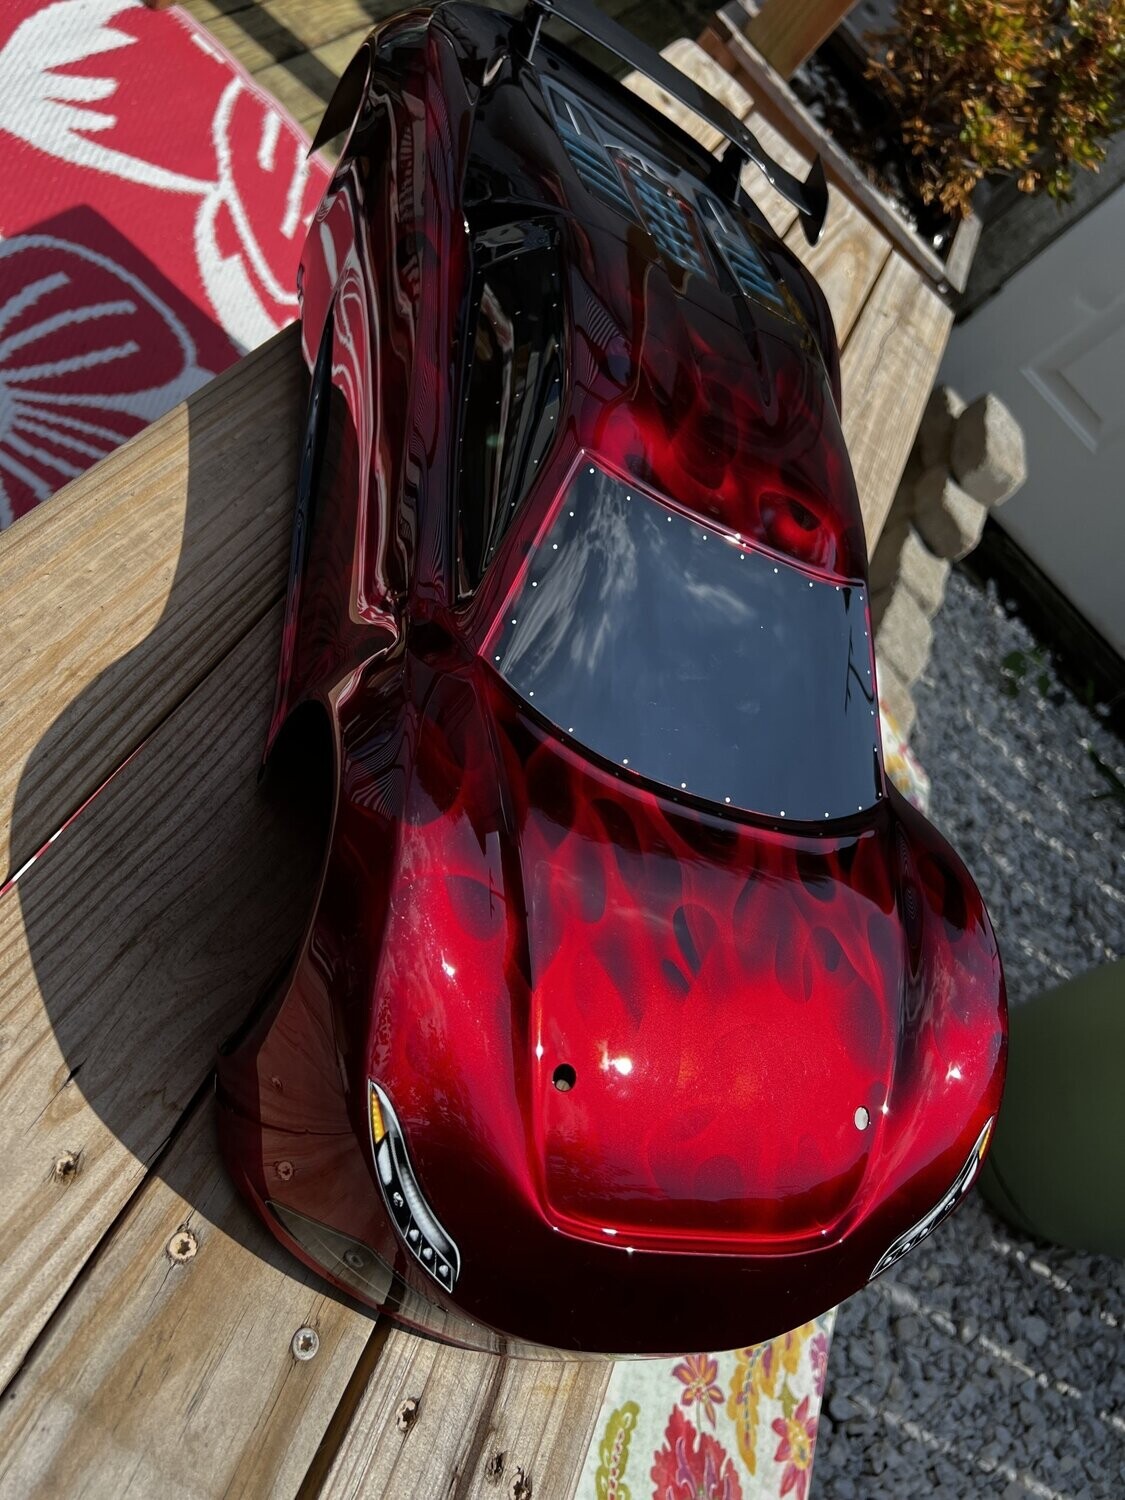 TRAXXAS X0-1 CANDY APPLE RED CHROME FLAMES